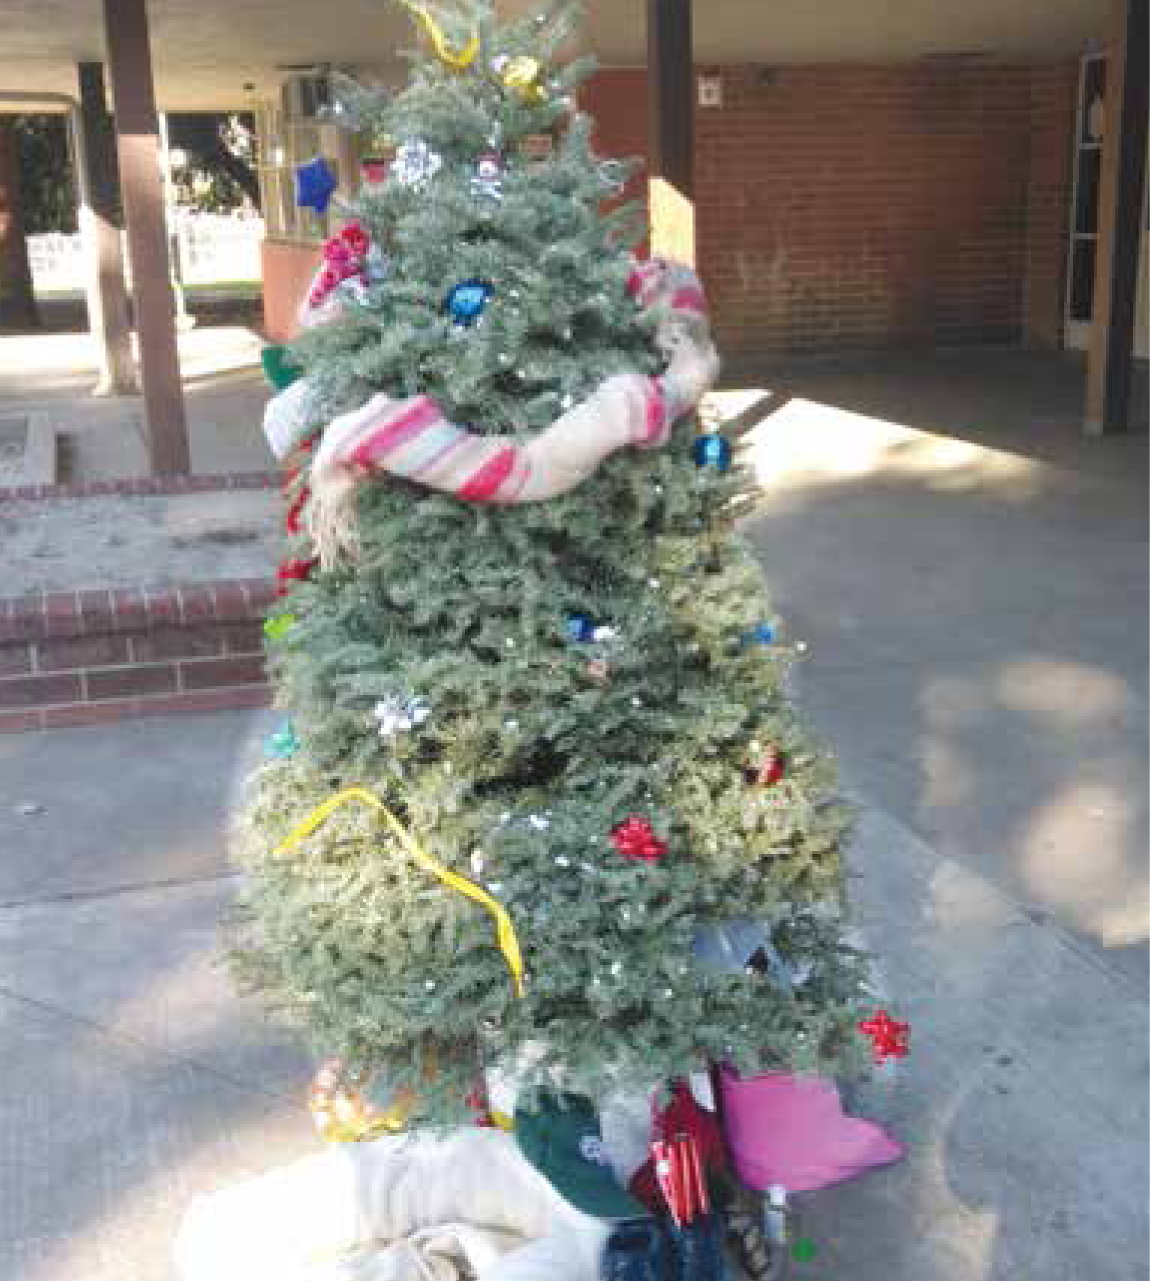 The Christmas tree was decked with gifts for all those who had no families.